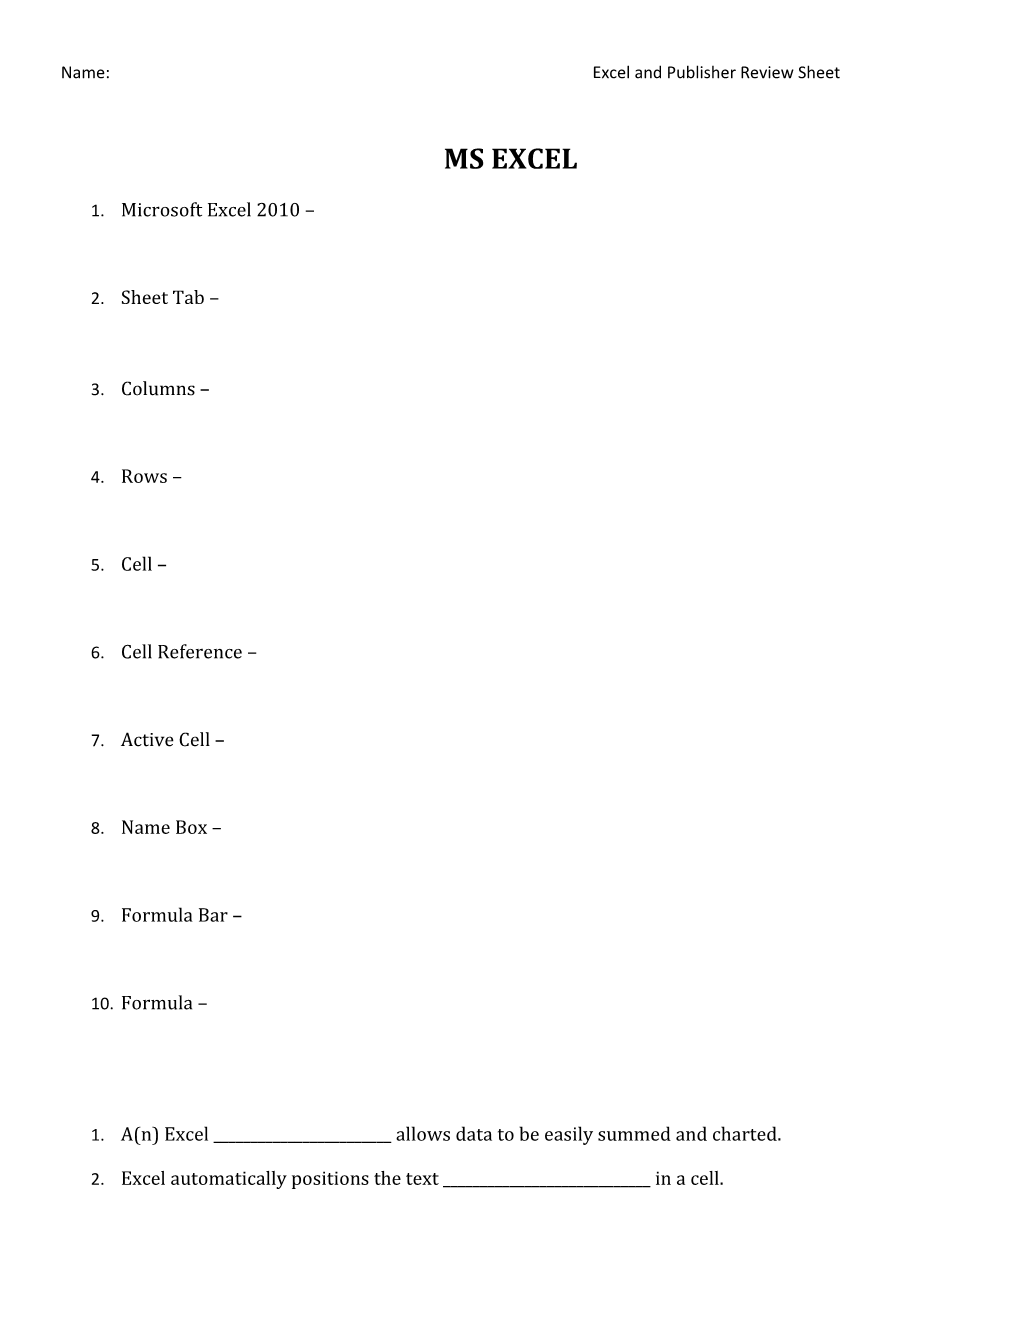 Name:Excel and Publisher Review Sheet